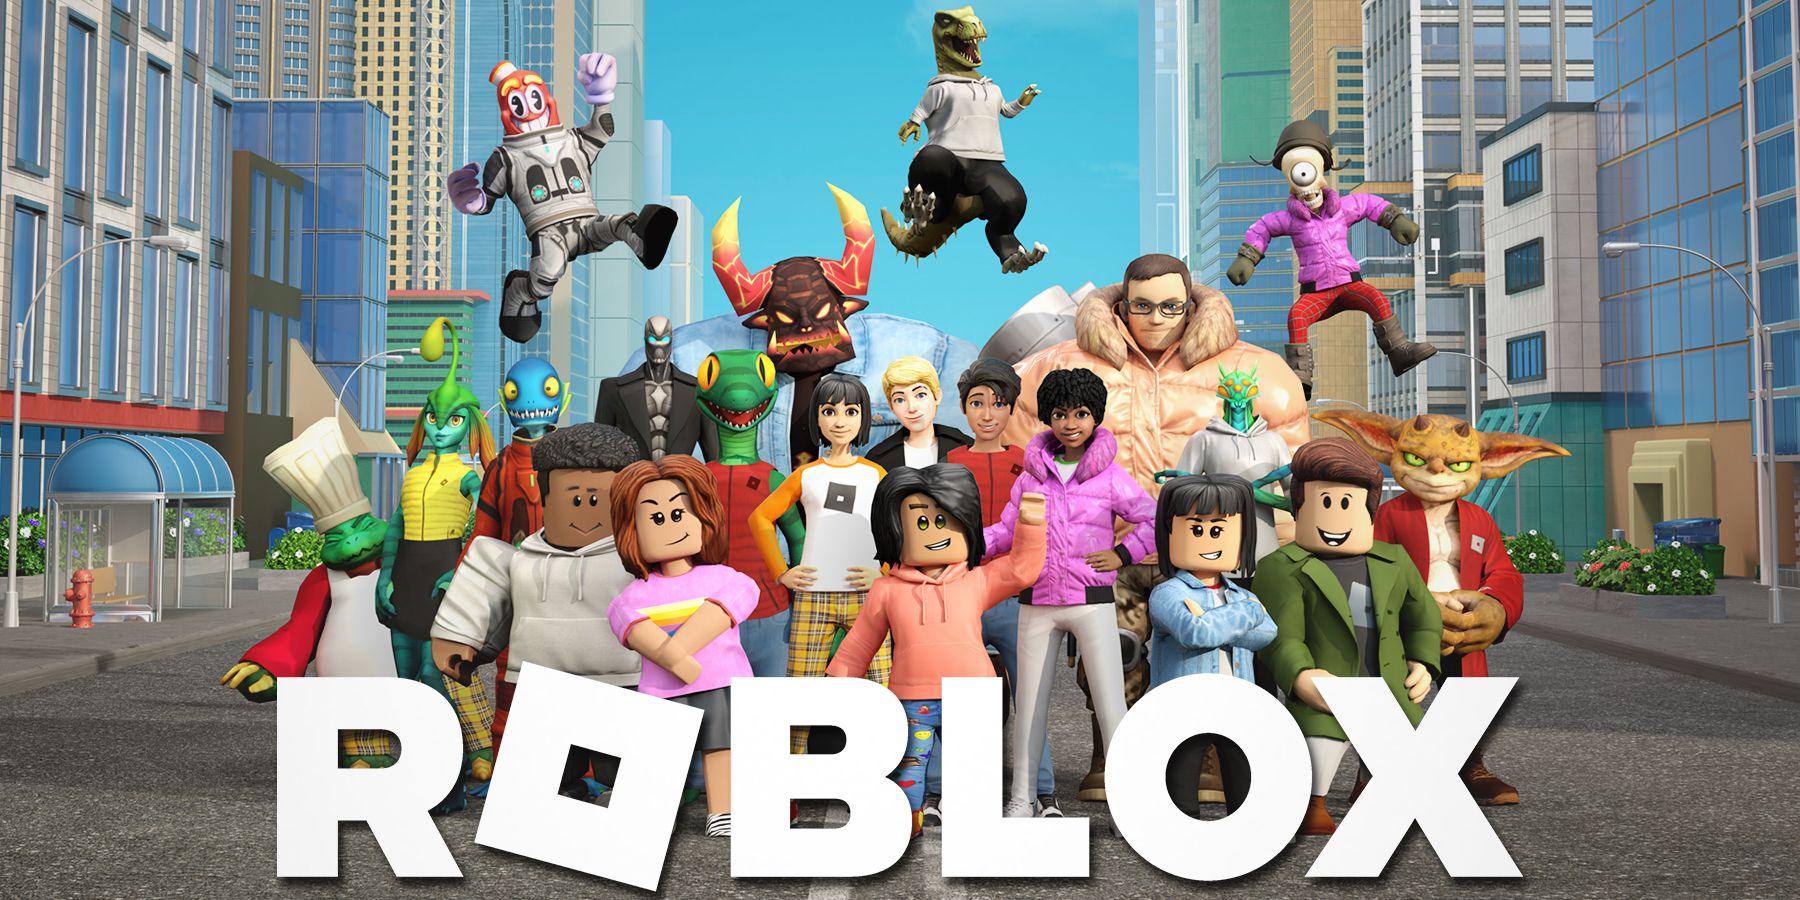 Roblox city character artwork with game logo